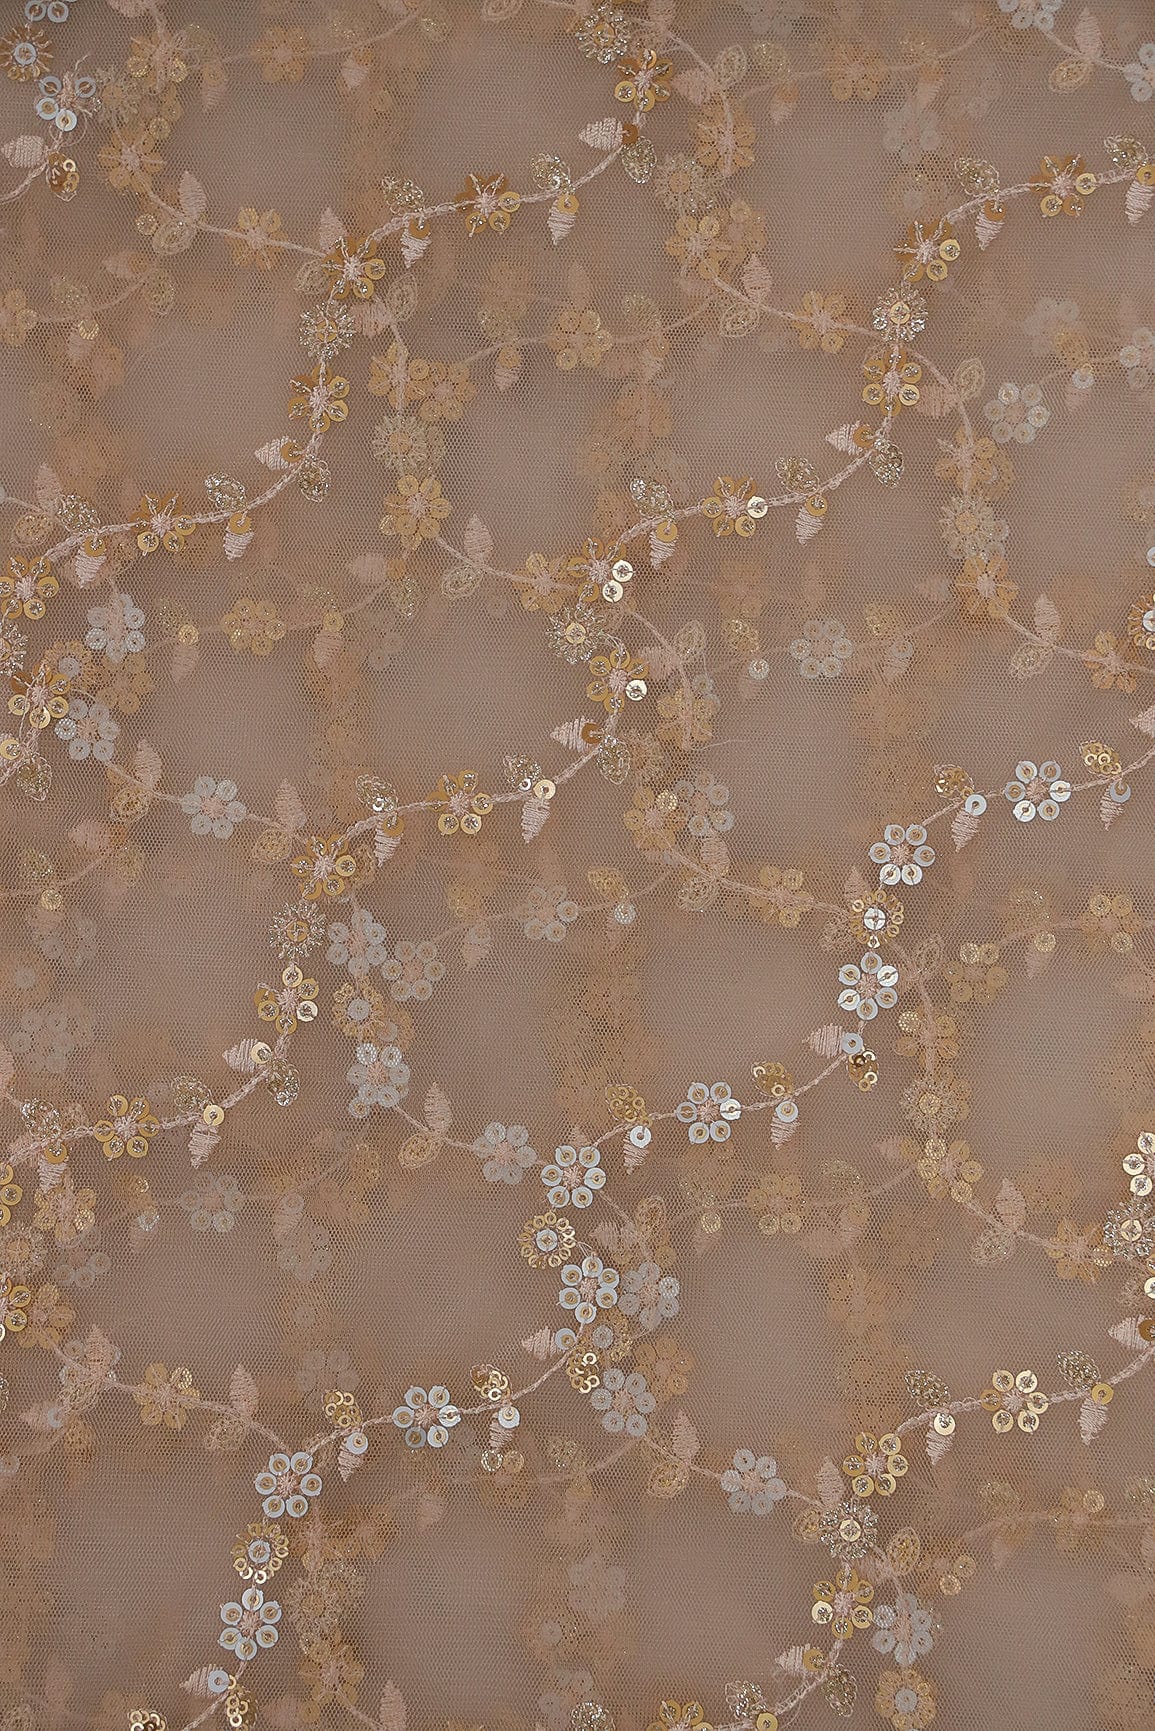 doeraa Embroidery Fabrics Gold Sequins and Leafy Thread Embroidery on Beige Soft Net Fabric